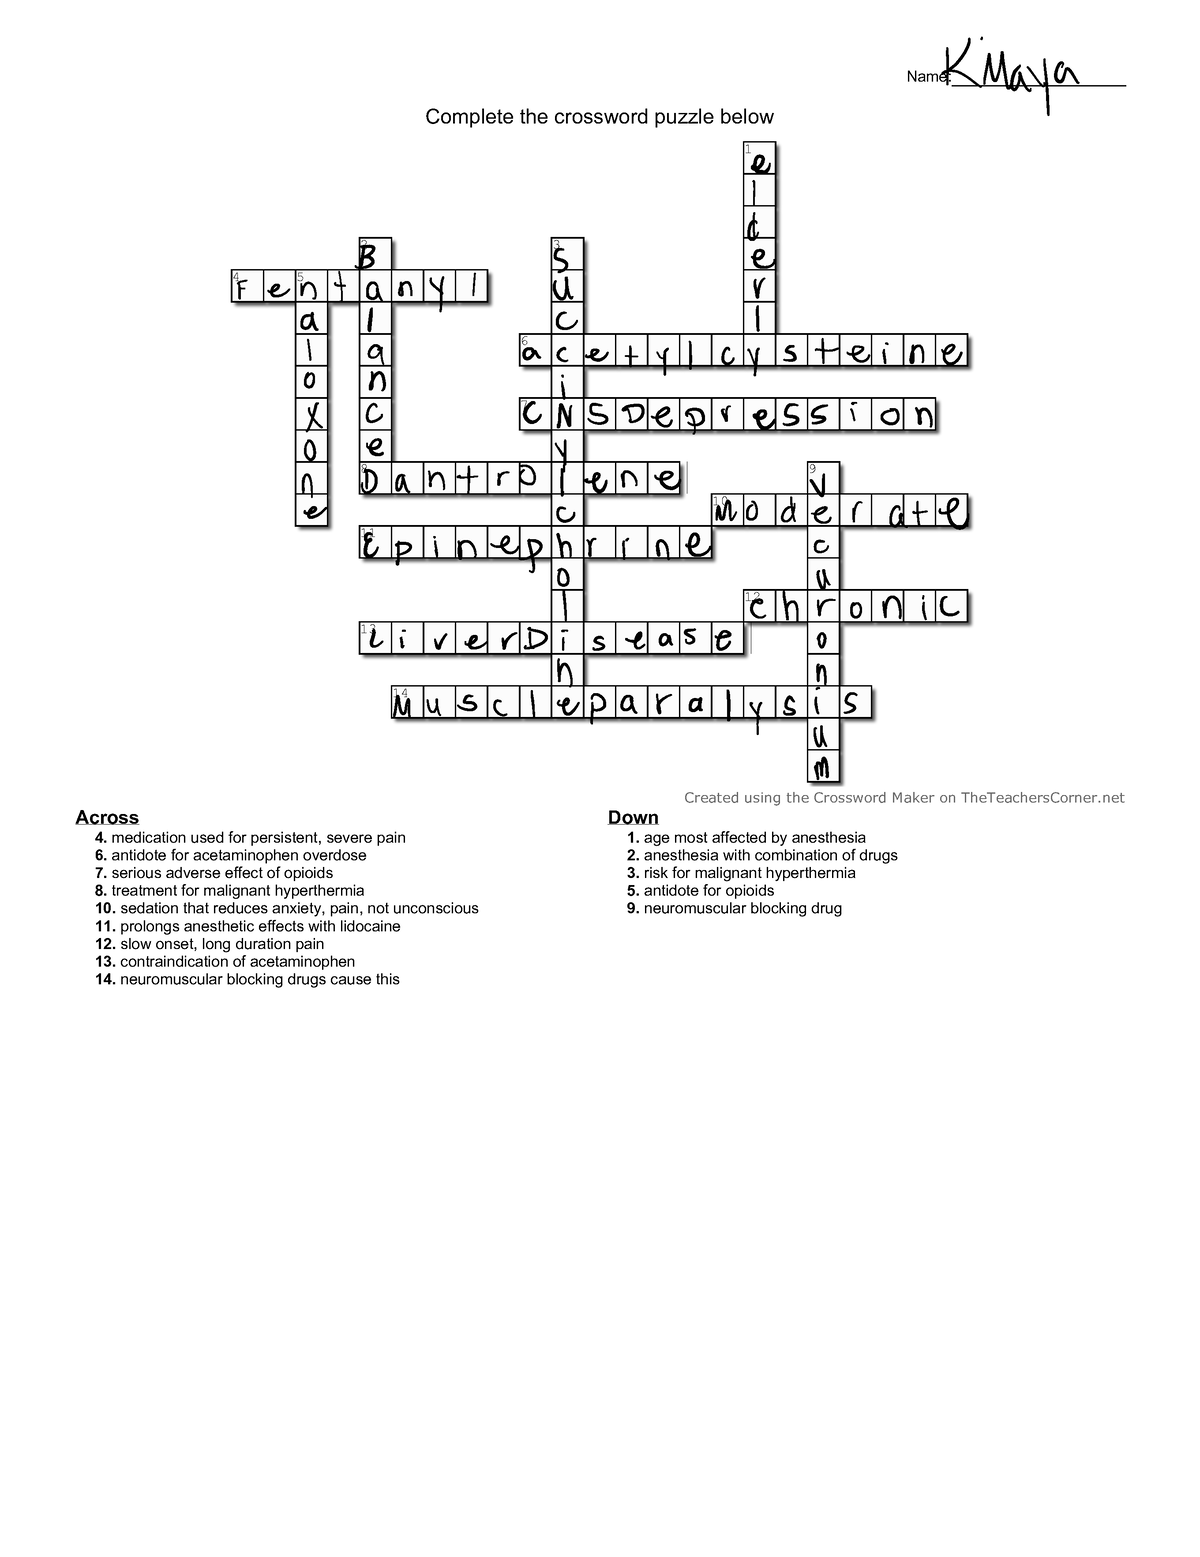 Ch 10 11 Crossword Puzzle Down 1 age most affected by anesthesia 2